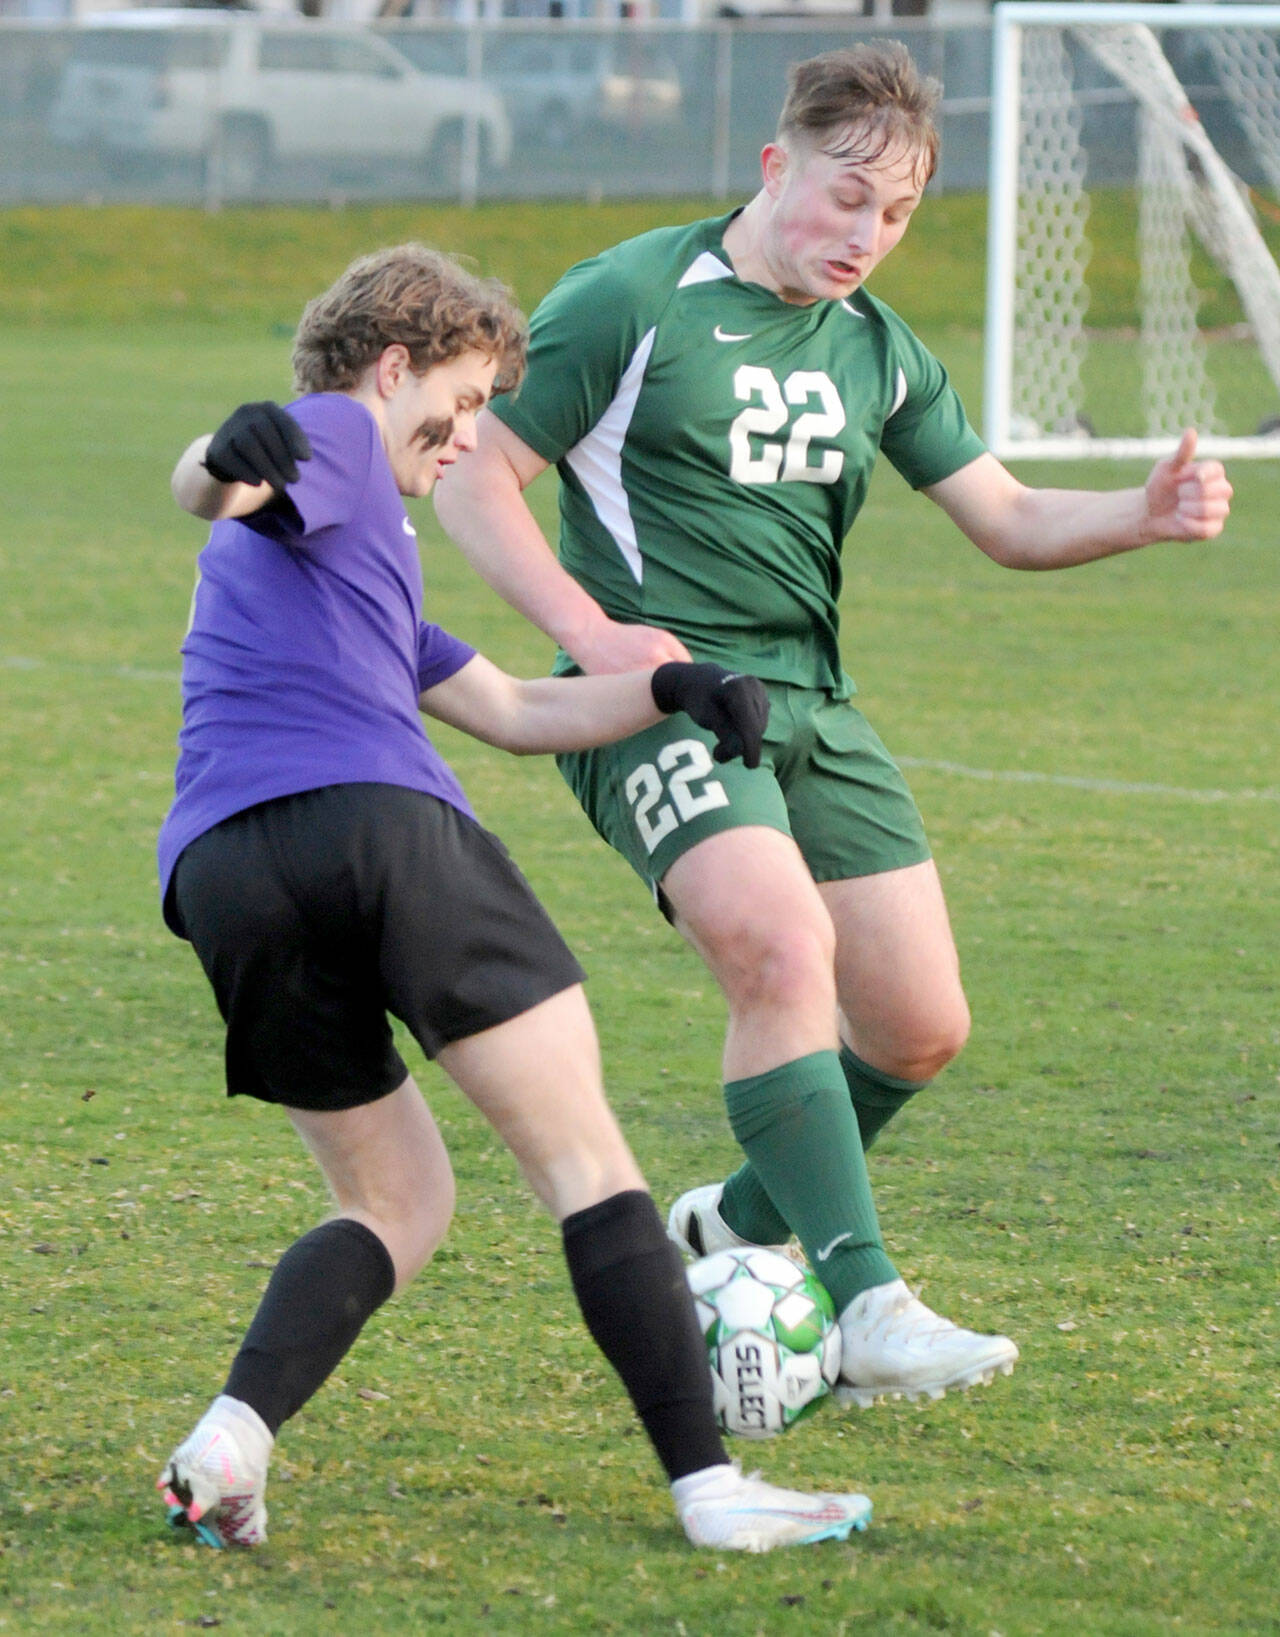 KEITH THORPE/PENINSULA DAILY NEWS Sequim’s Keaton King, left, and Port Angeles’ Eli Fischer battle for the ball on Thursday at Port Angeles Civic Field.